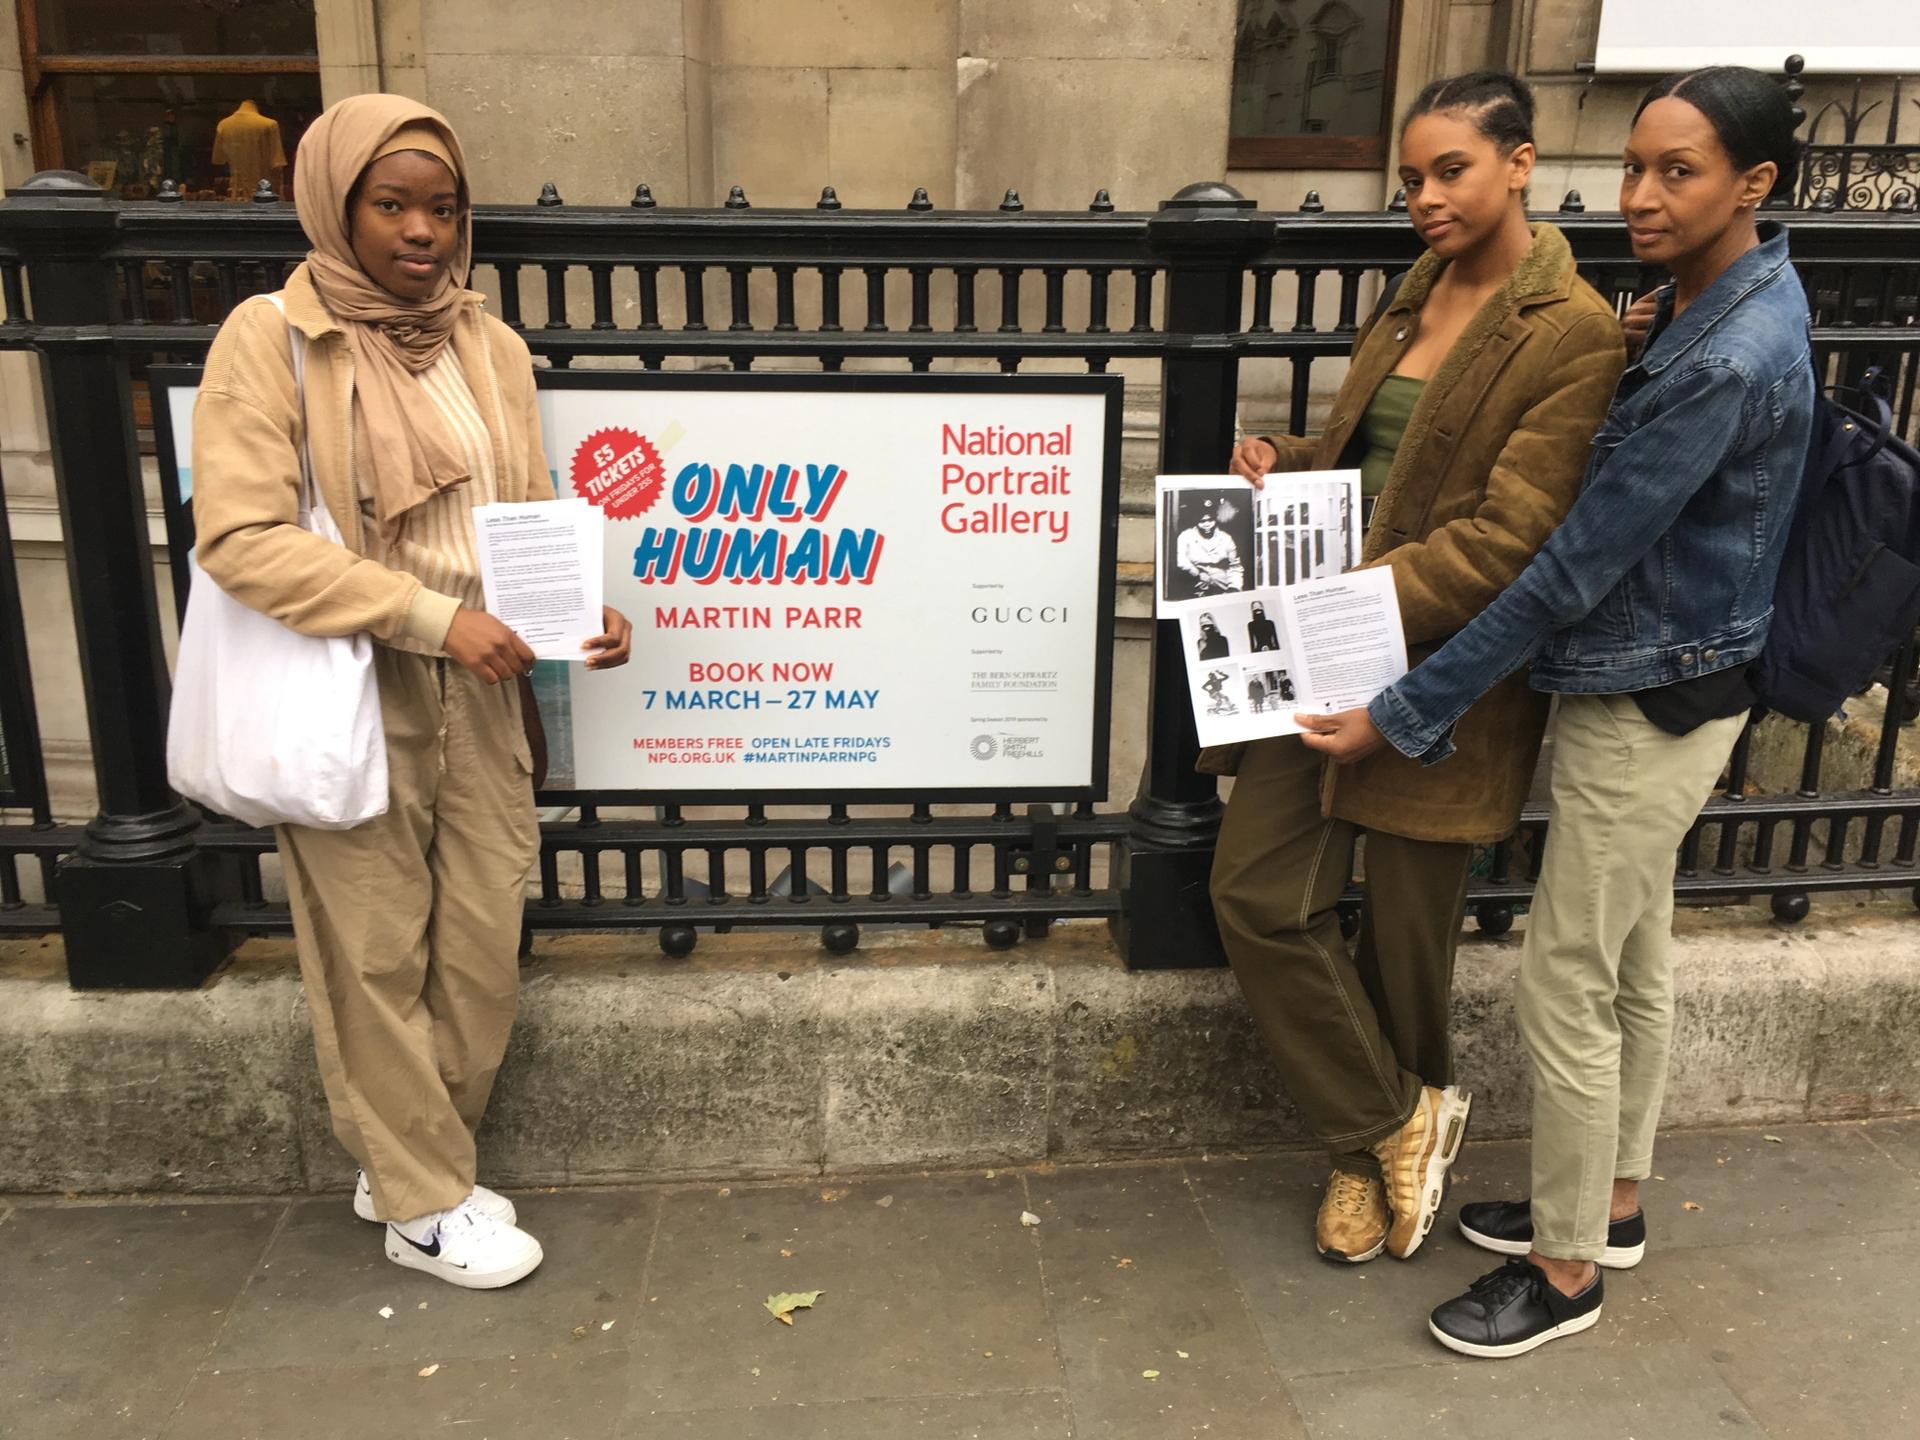 Sahra-Isha, Mercedes and Roxanne picketing outside Martin Parr's Only Human exhibition at the National Portrait Gallery, London Mercedes Baptiste Halliday